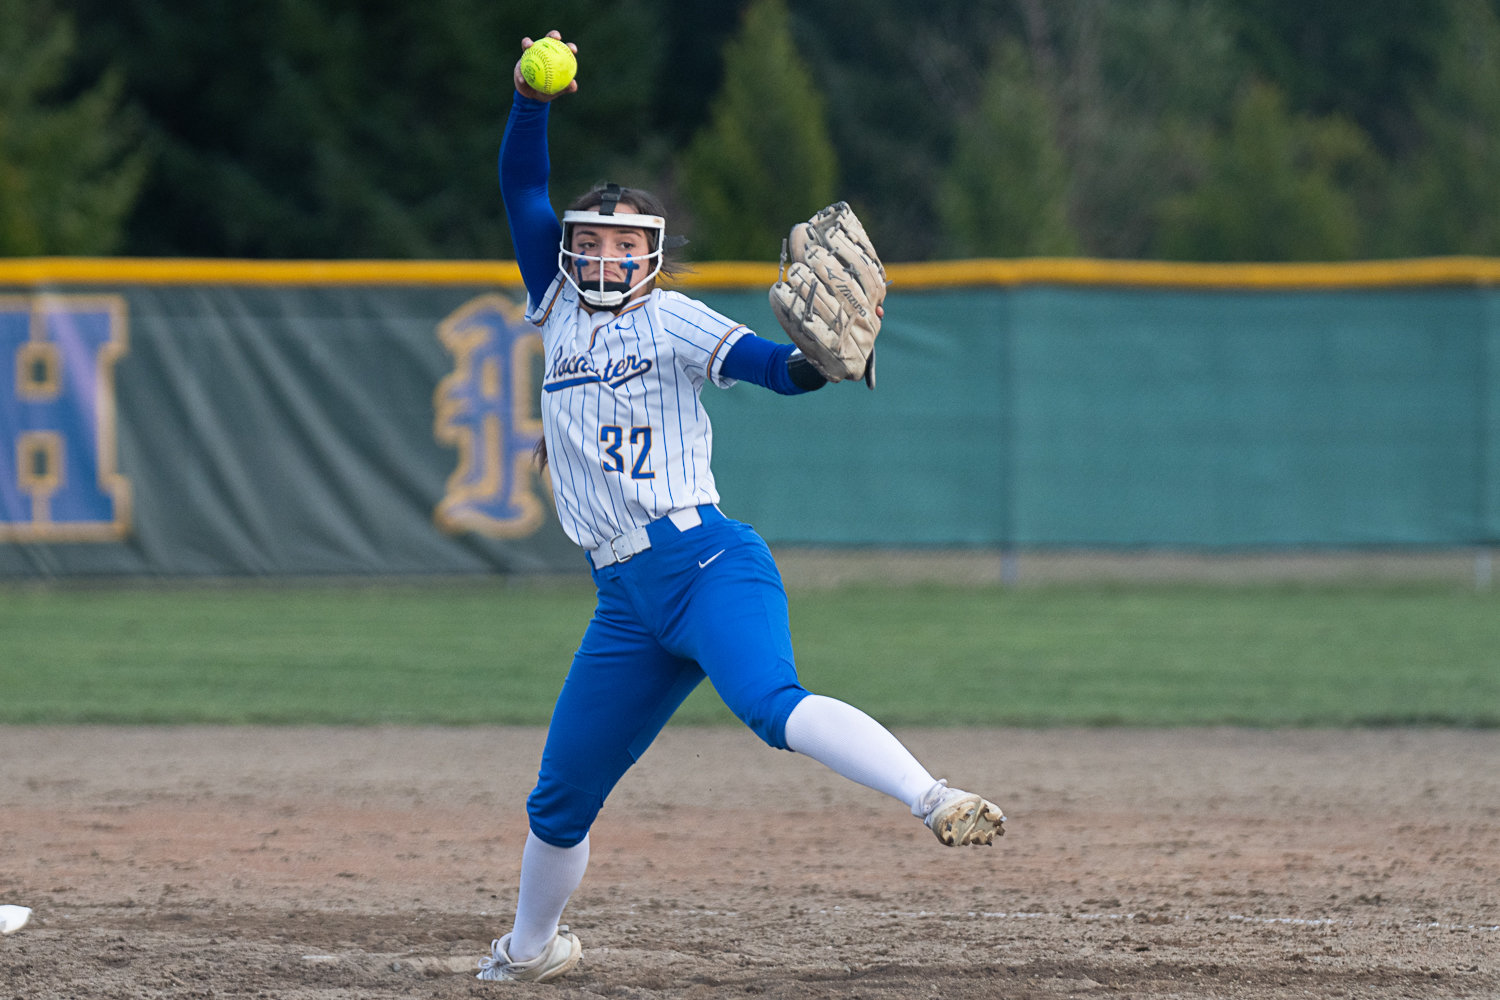 Layna Demers winds and fires during Rochester's 5-3 loss to Tumwater on March 29.